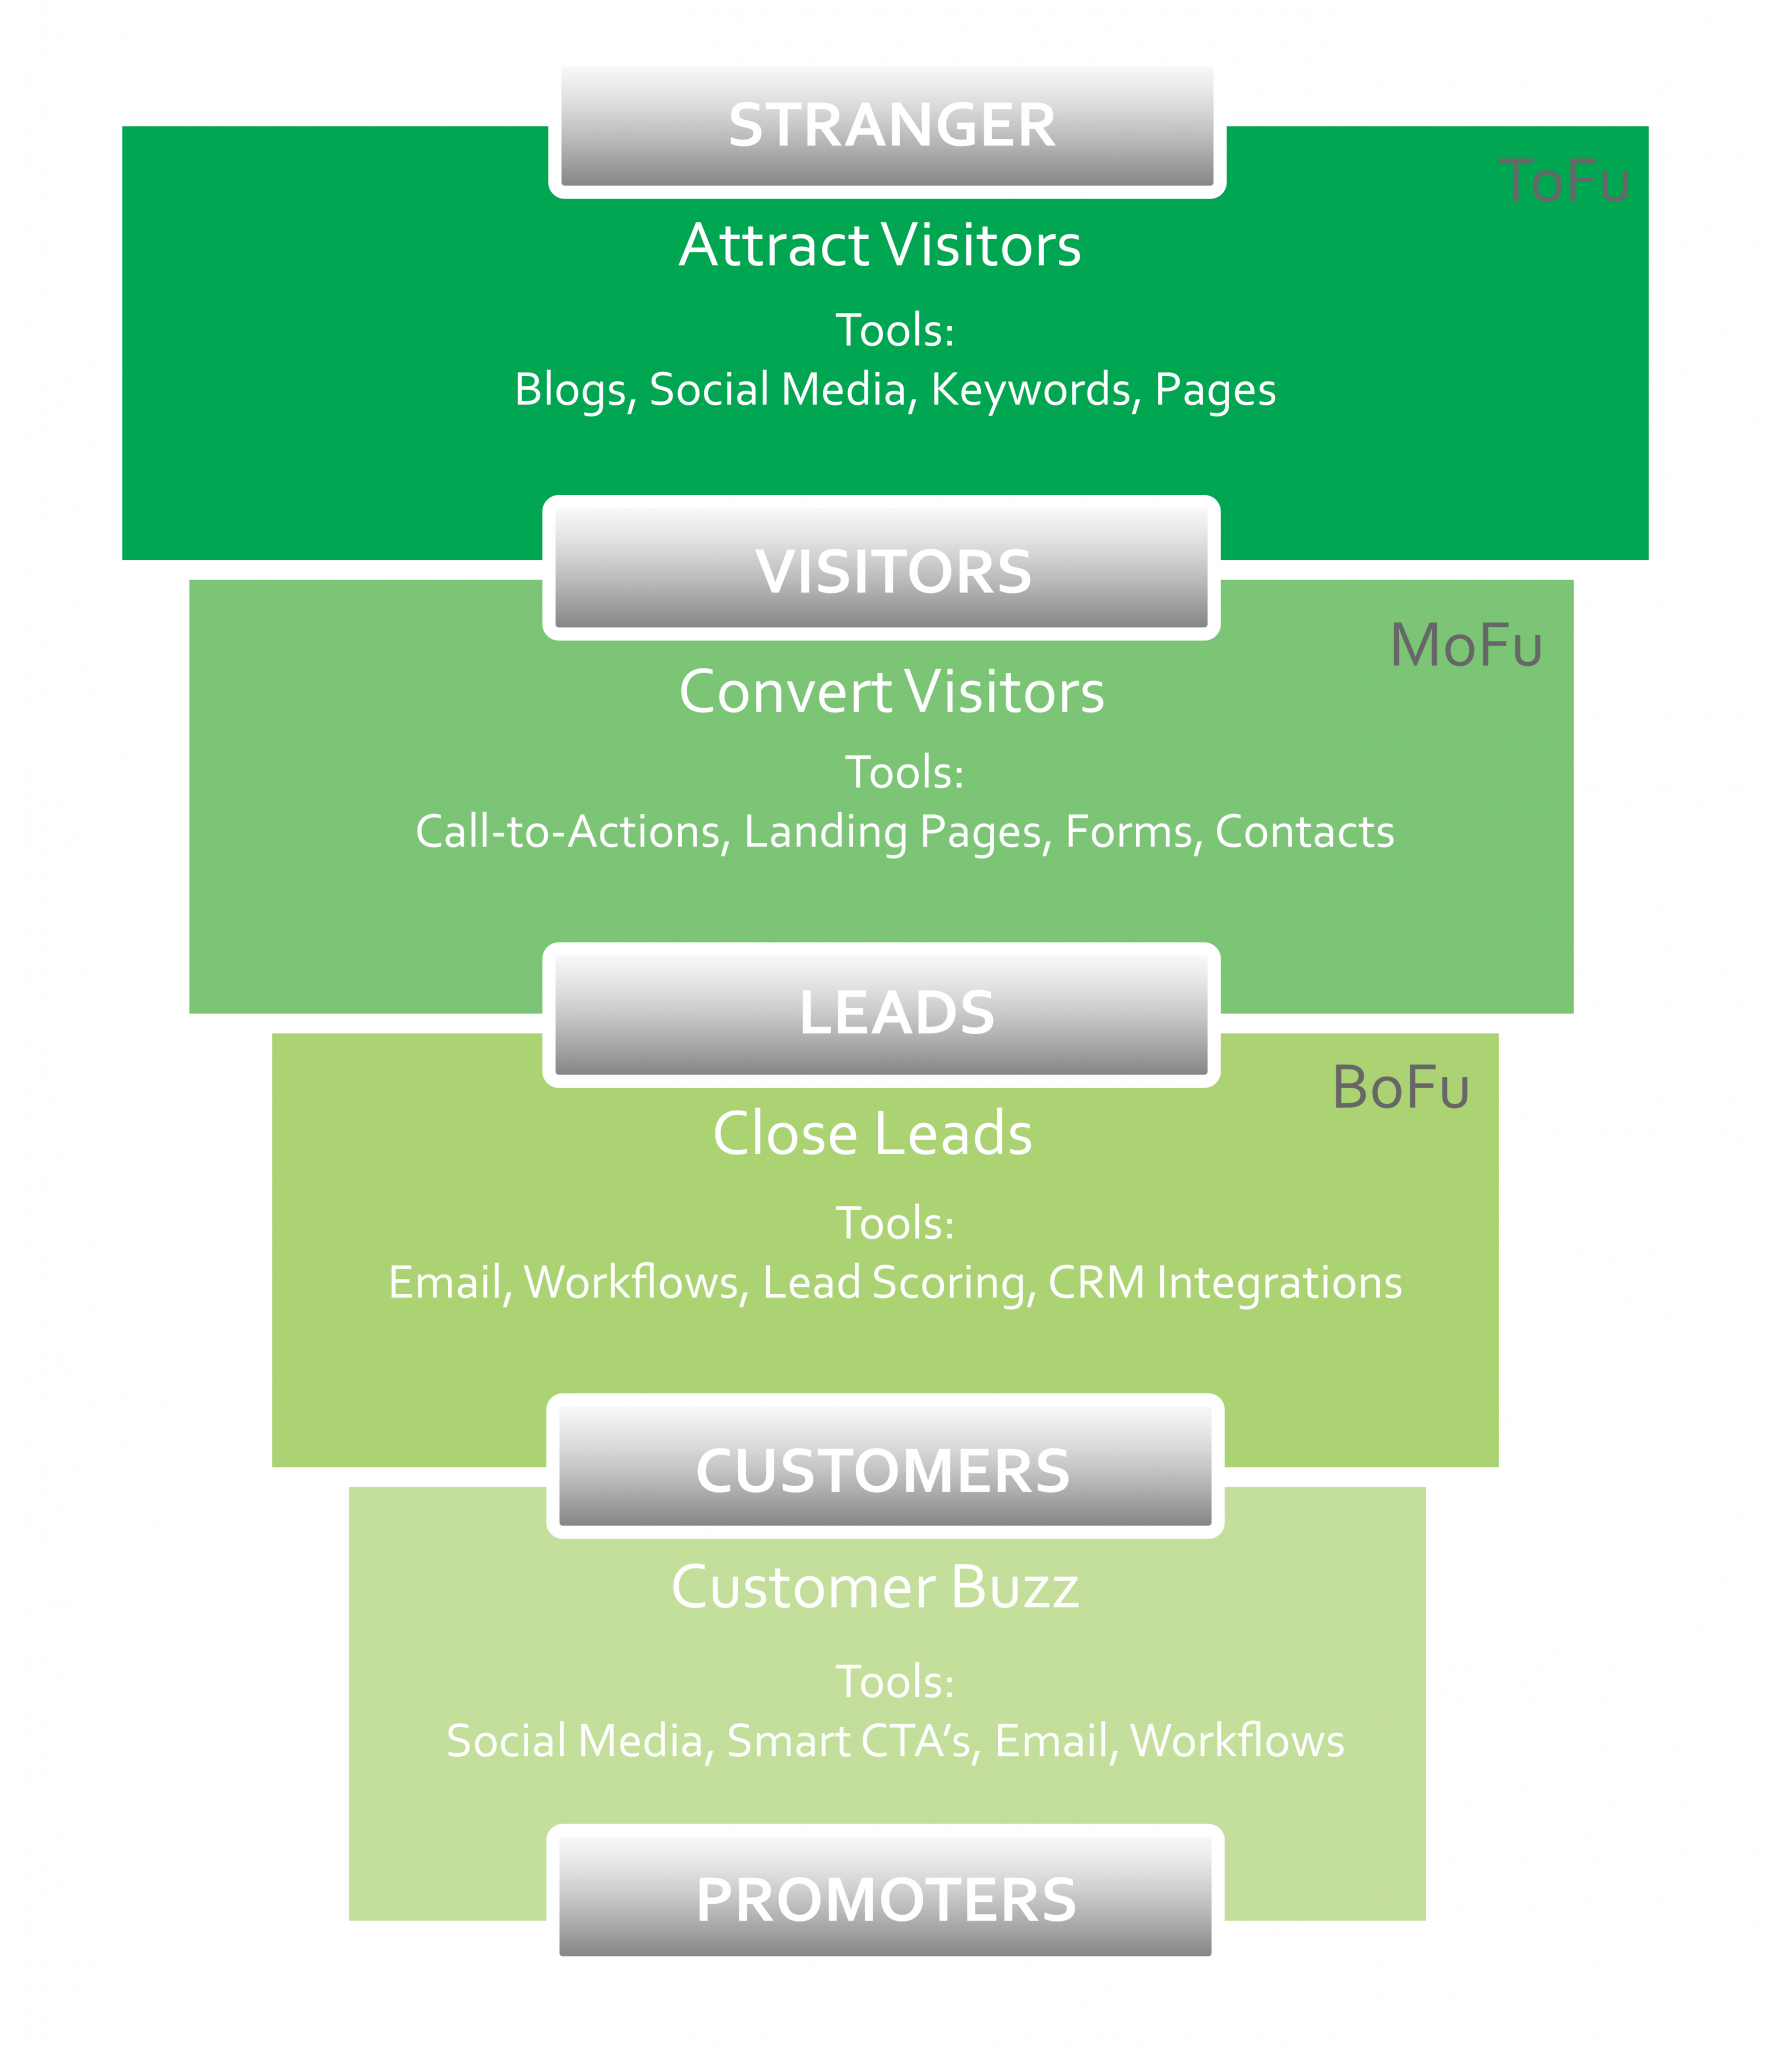 What do we mean by lead generation?